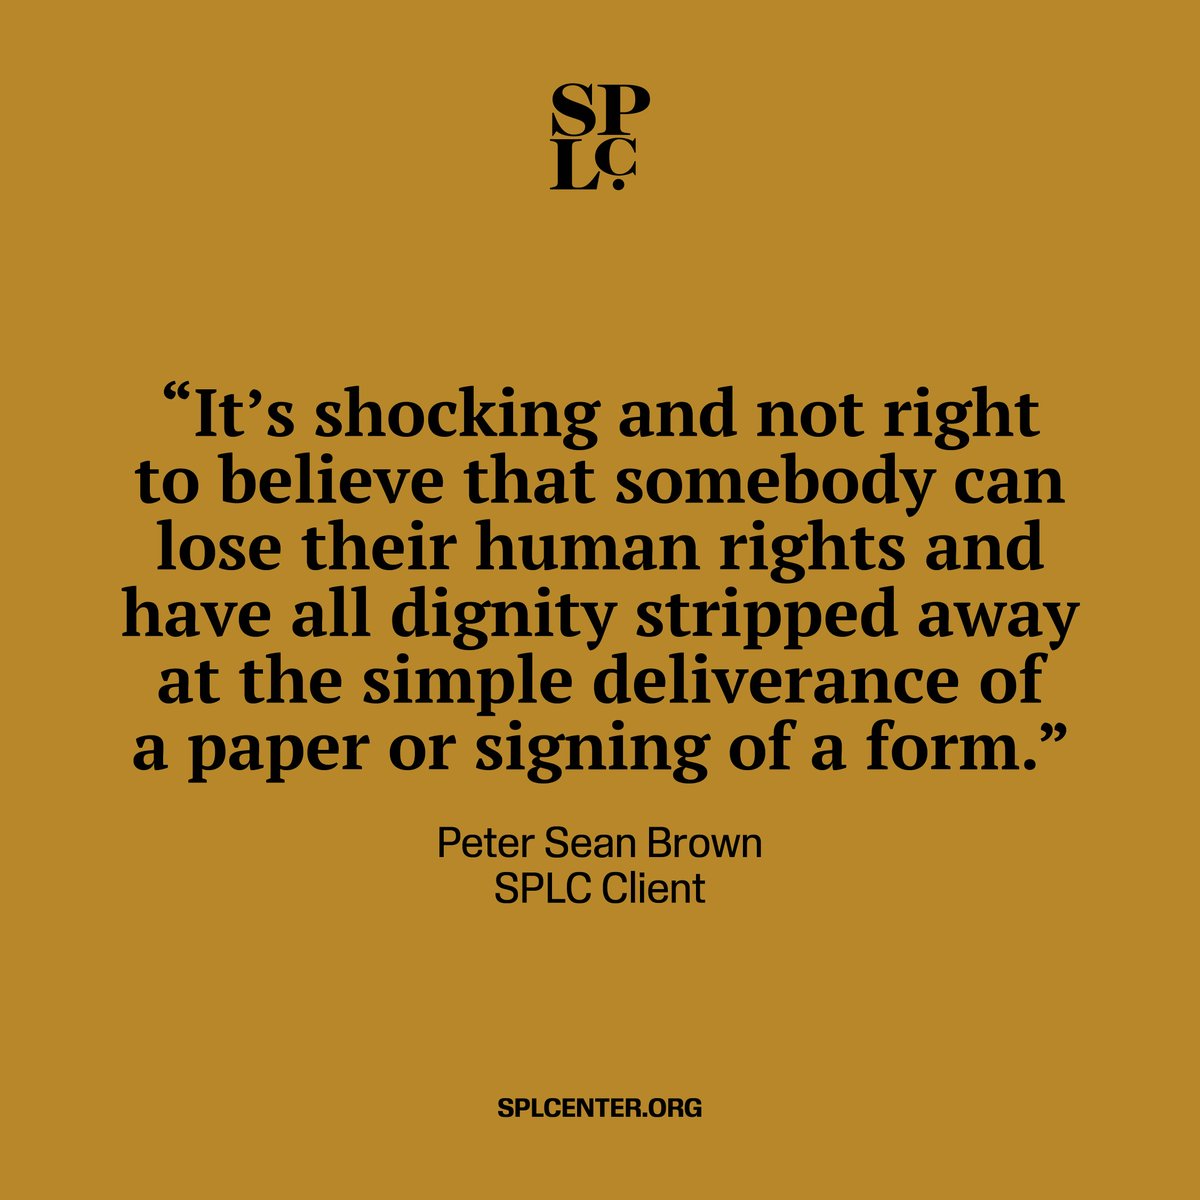 📣The SPLC is headed to court seeking justice for Peter Sean Brown, a Philadelphia-born man who was unlawfully detained in 2018. #ImmigrantJustice His case highlights the dangers of ill-equipped local police enforcing immigration laws. More on the suit📲: bit.ly/3bL8Yex